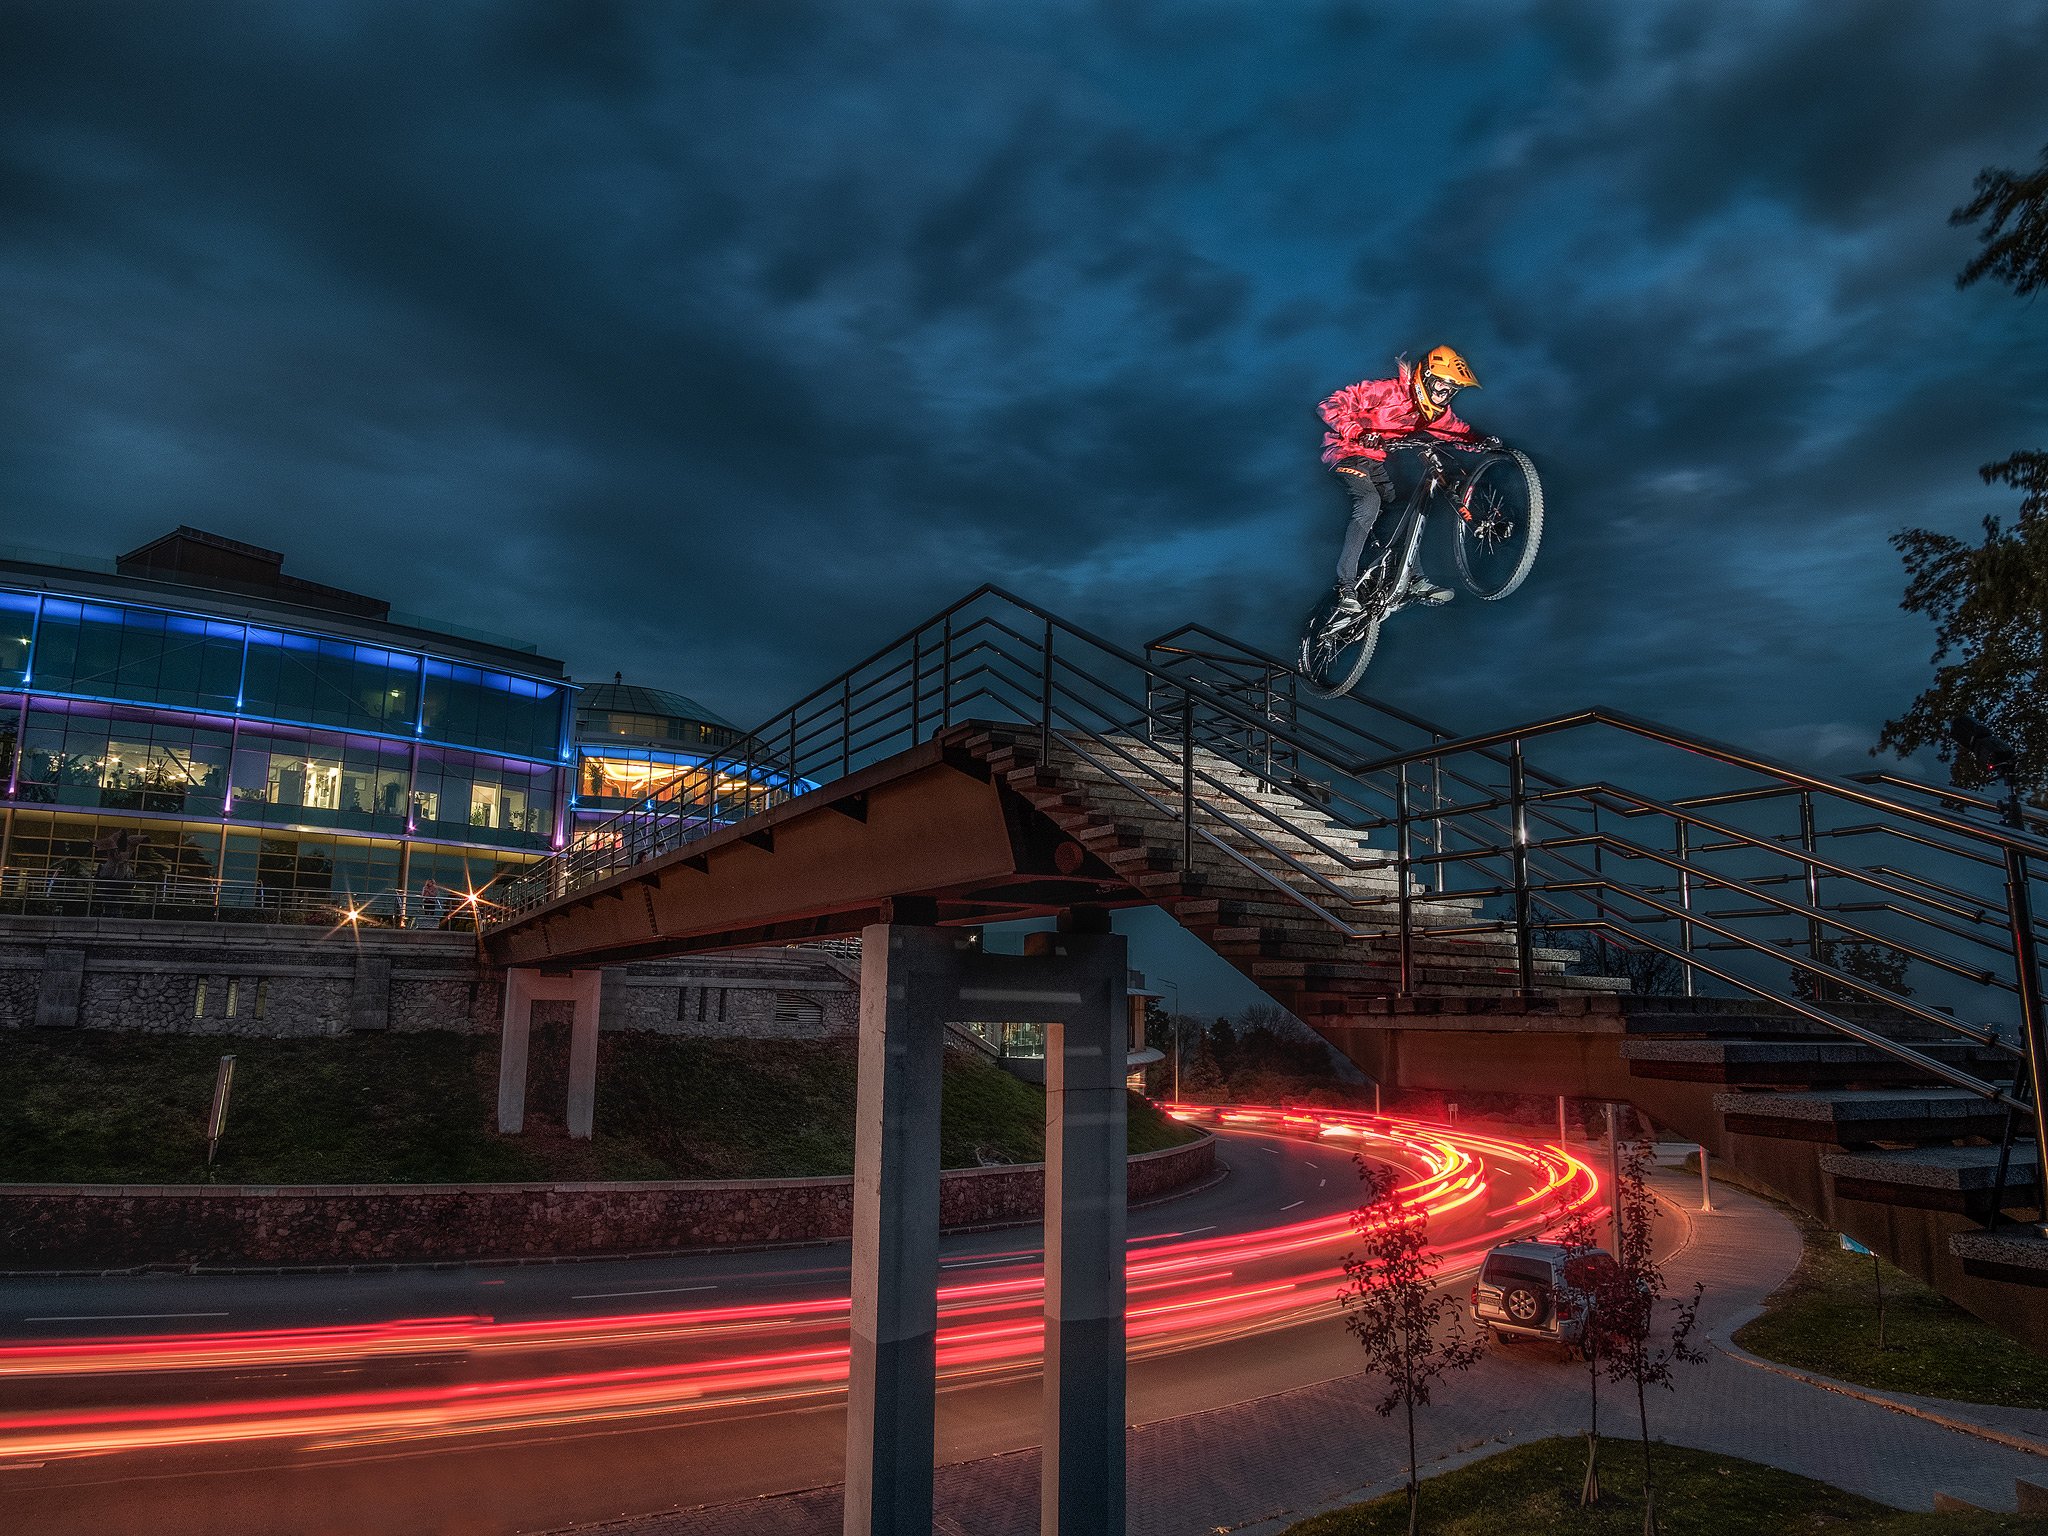 Bicycle  Lifestyles  One Person  Cycling  Outdoors  Full Length  Healthy Lifestyle  Leisure Activity  Extreme Sports  Sport  Motion  Skill  dh  downhill  urban  jumping  freeride  drop  light trail  long exposure  flash  red  blue  rider  ukraine  kyiv  c, Юрий Никитюк